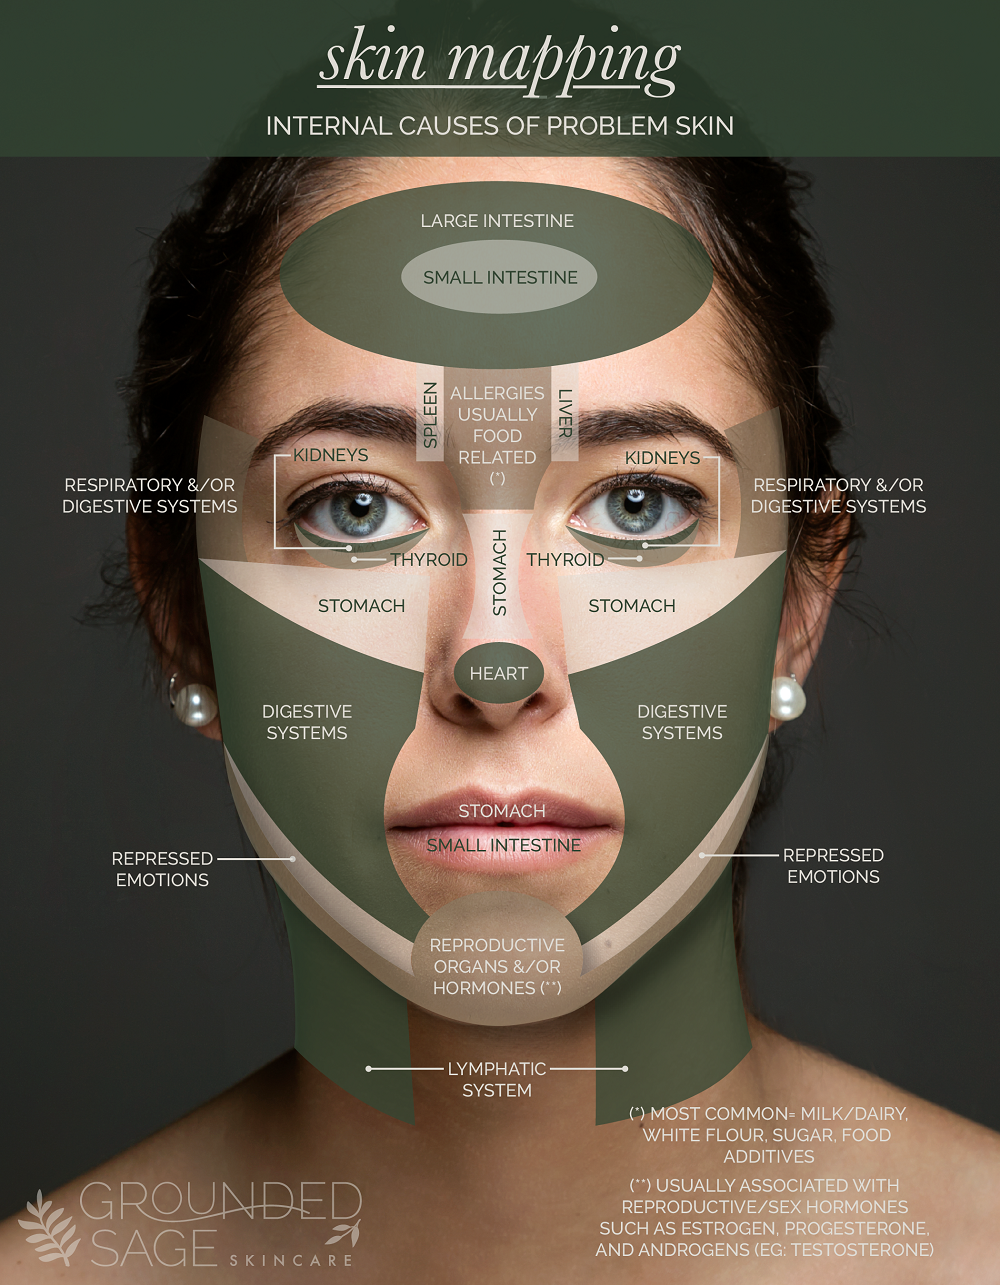 Acne Face Map / skin mapping / acne explained / internal causes of acne / holistic beauty / green beauty